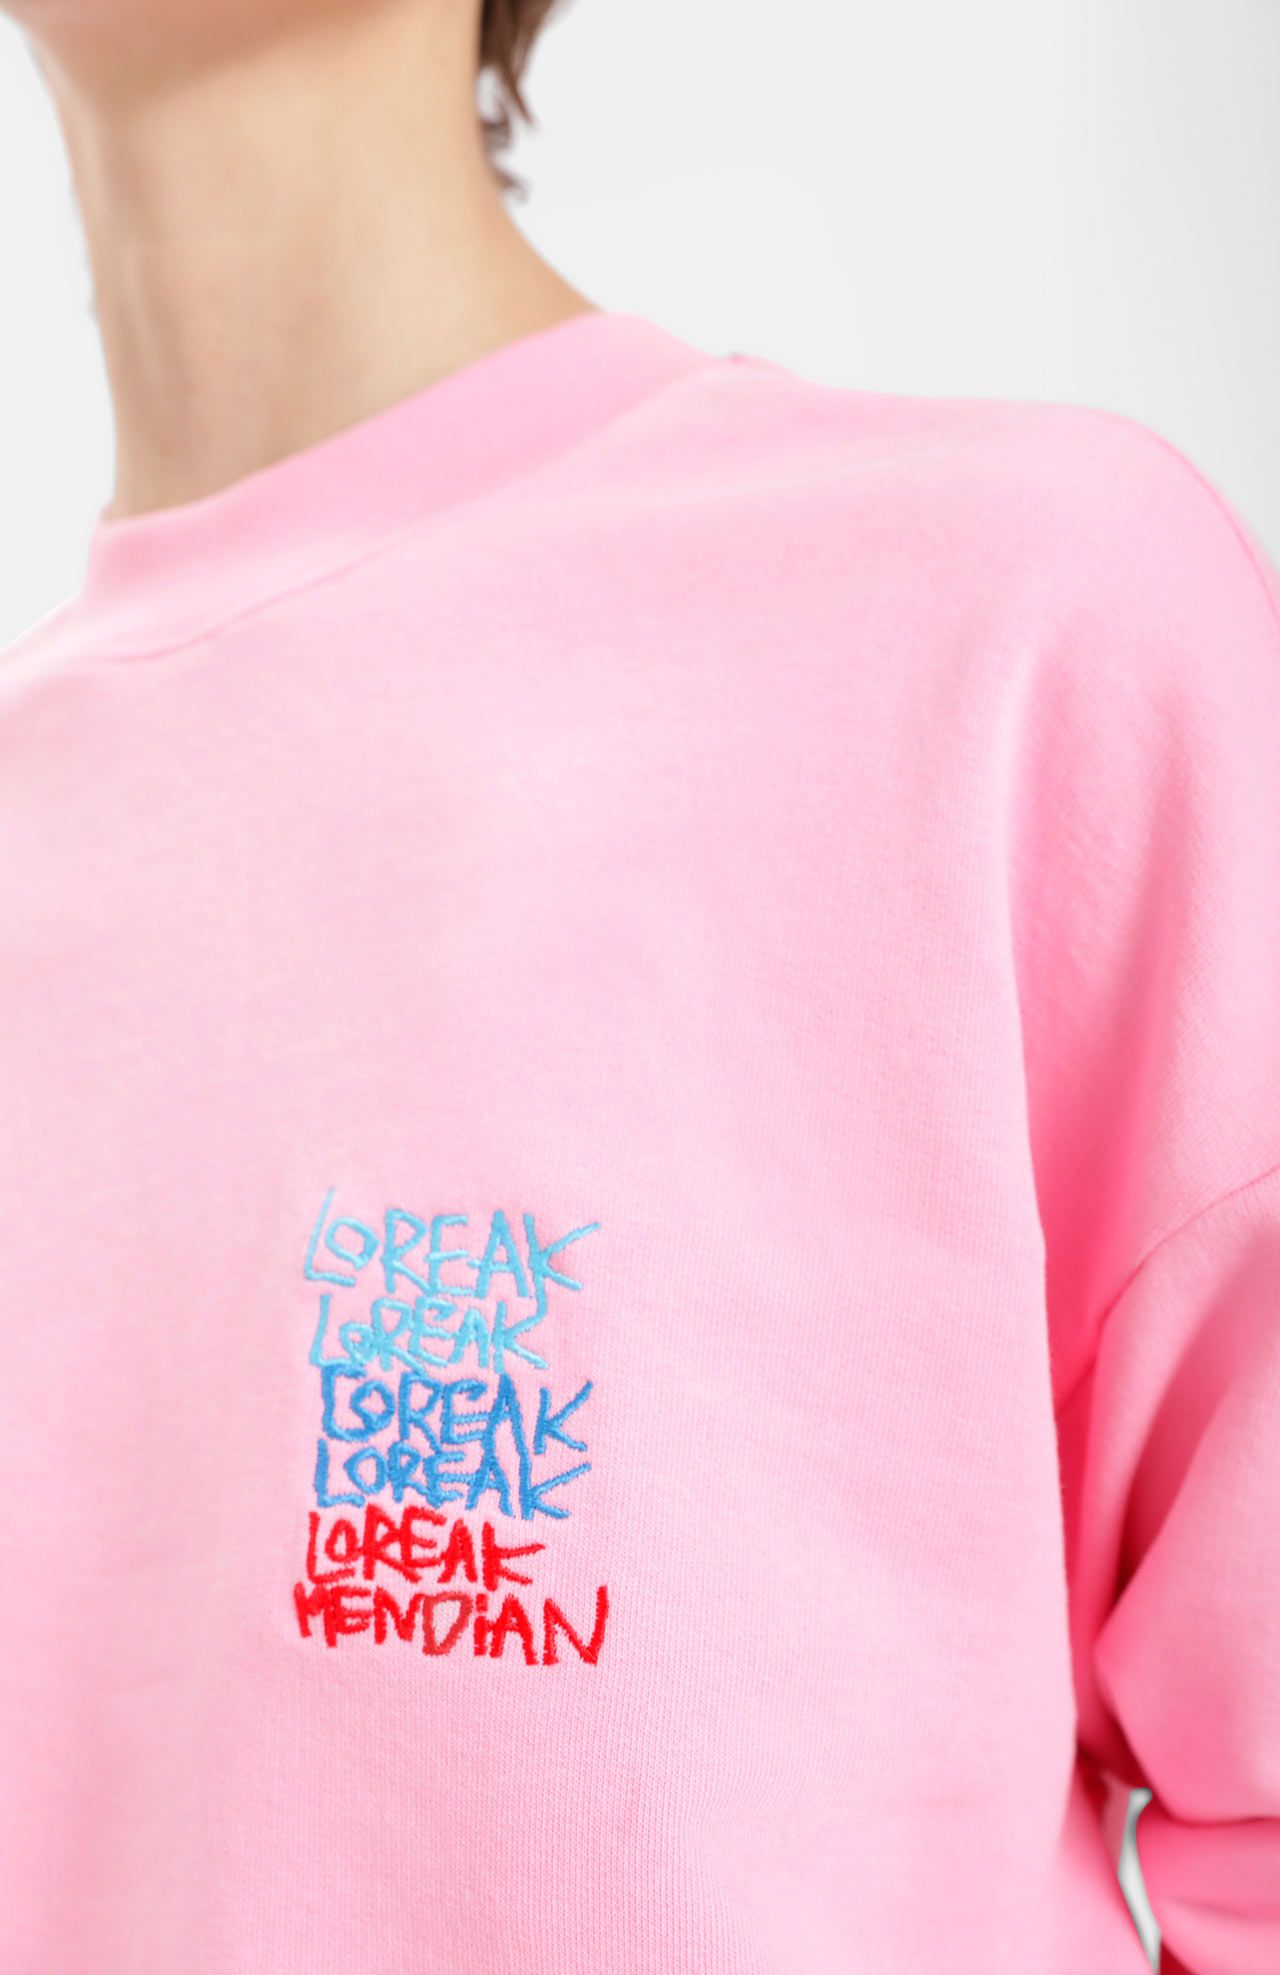 Person wearing a pink shirt with a repeated embroidered design of the words "L'oreak" in blue, light blue, and red.